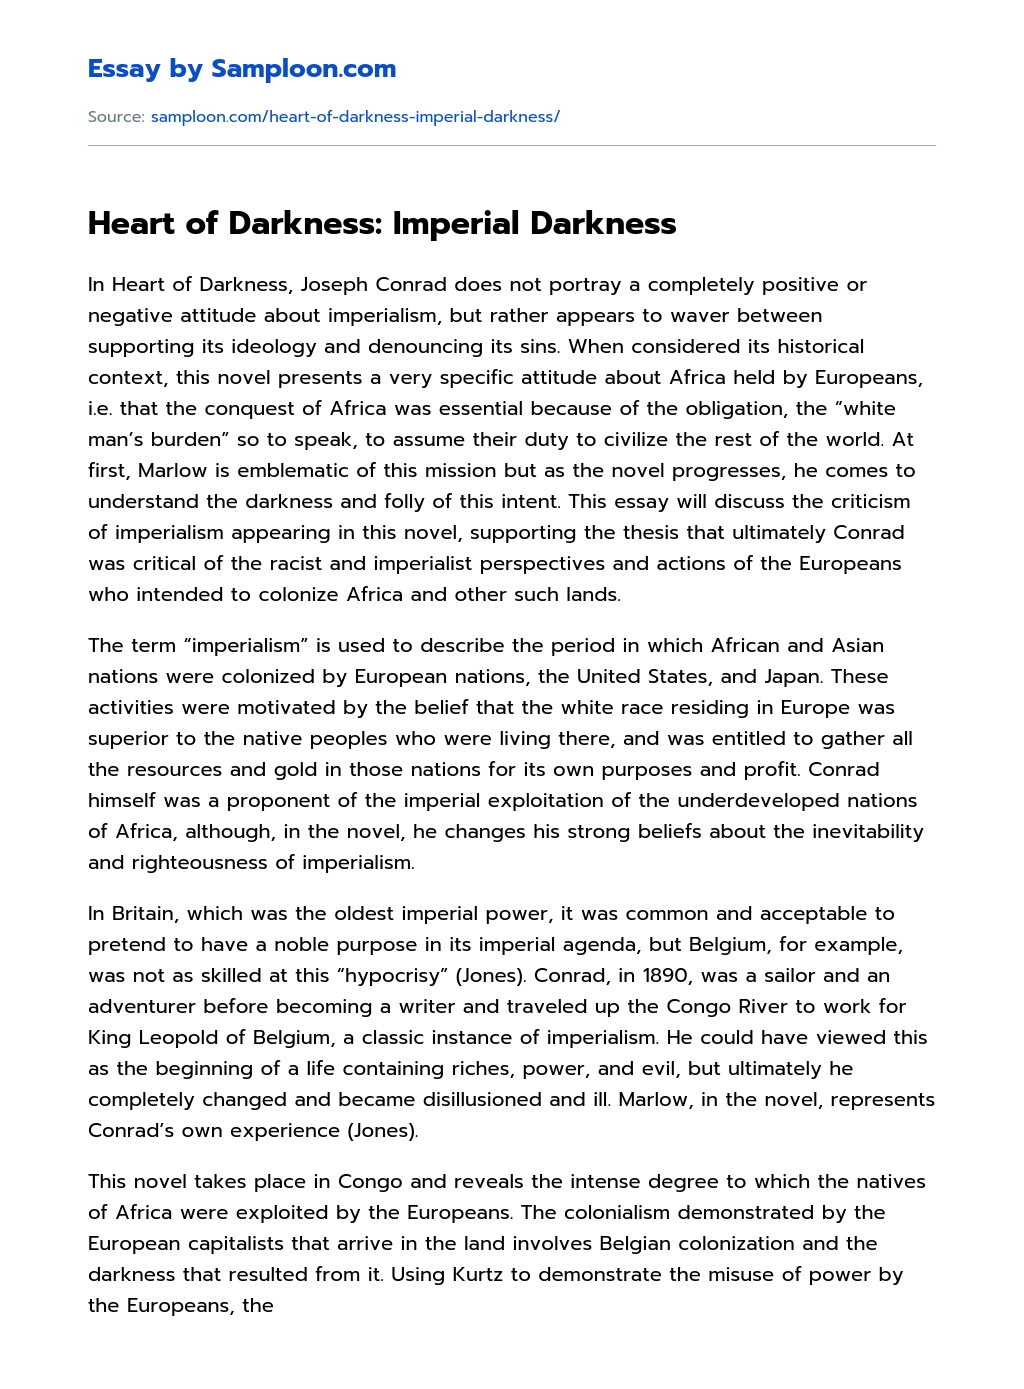 Heart of Darkness: Imperial Darkness Character Analysis essay